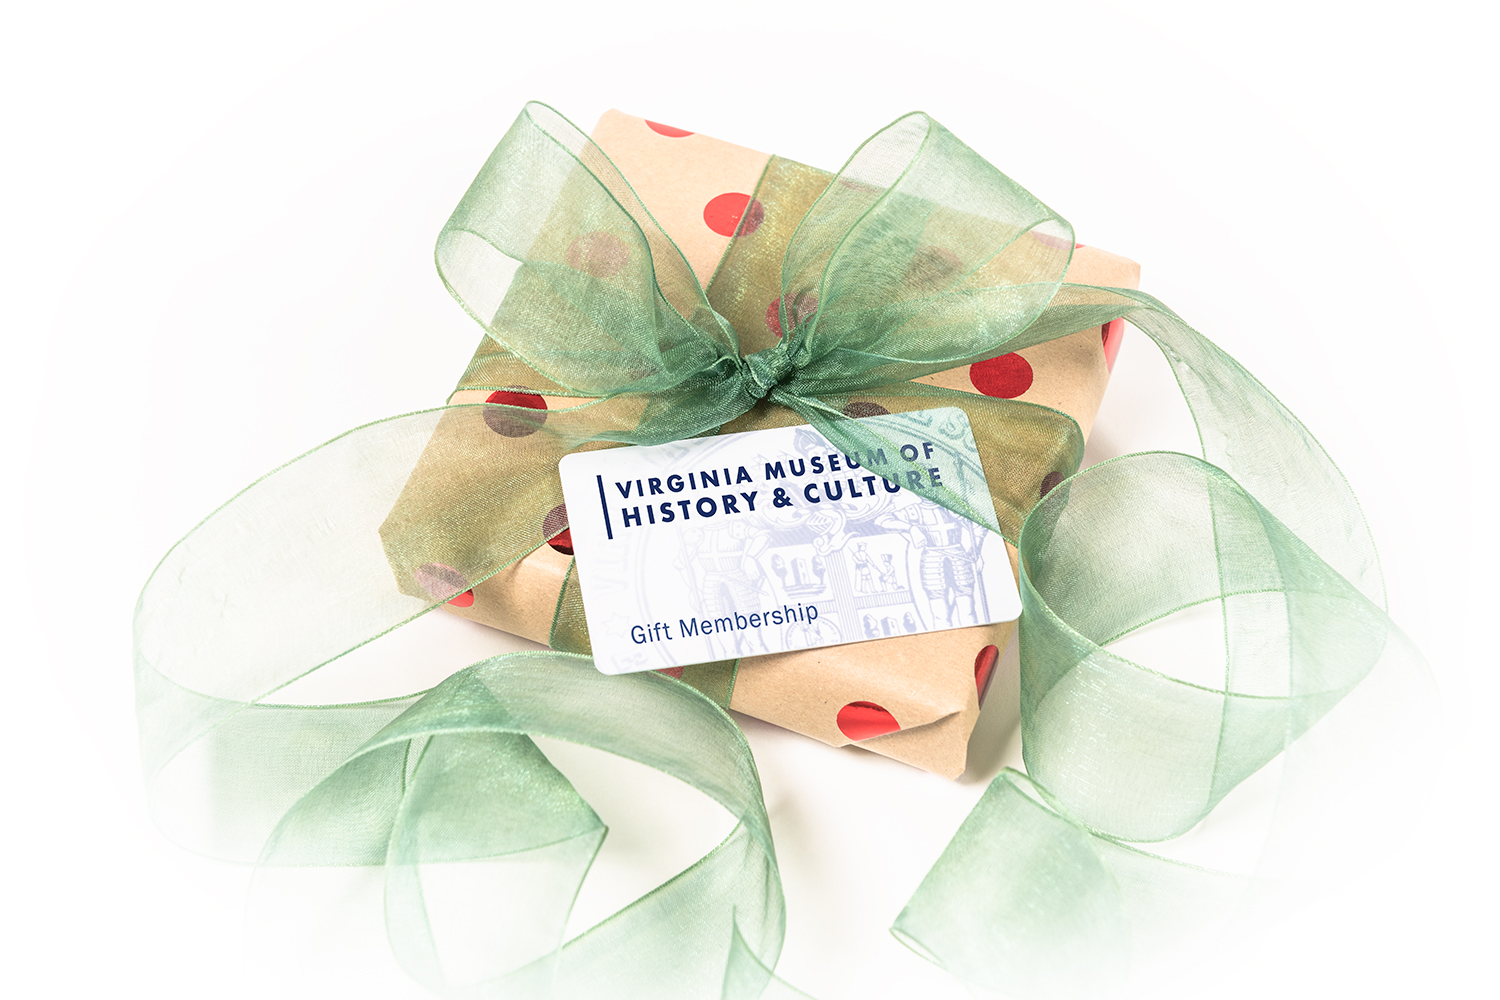 A wrapped box with ribbon has a gift card on top of it that says Virginia Museum of History & Culture Gift Membership